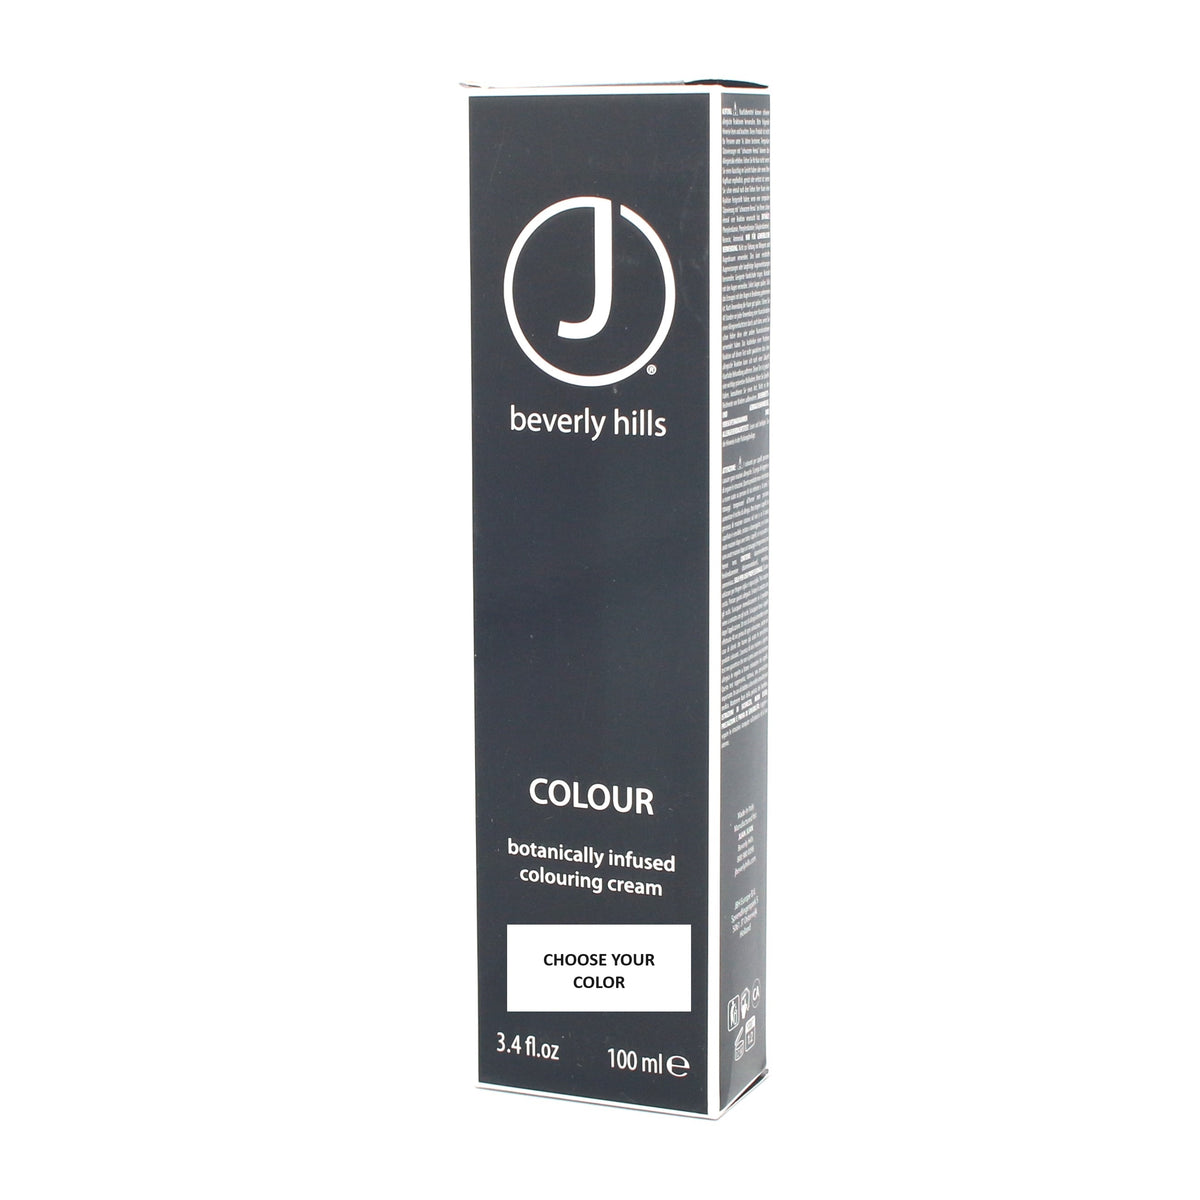 J Beverly Hills Colour Botanically Infused Colouring Cream 3.4 oz ...